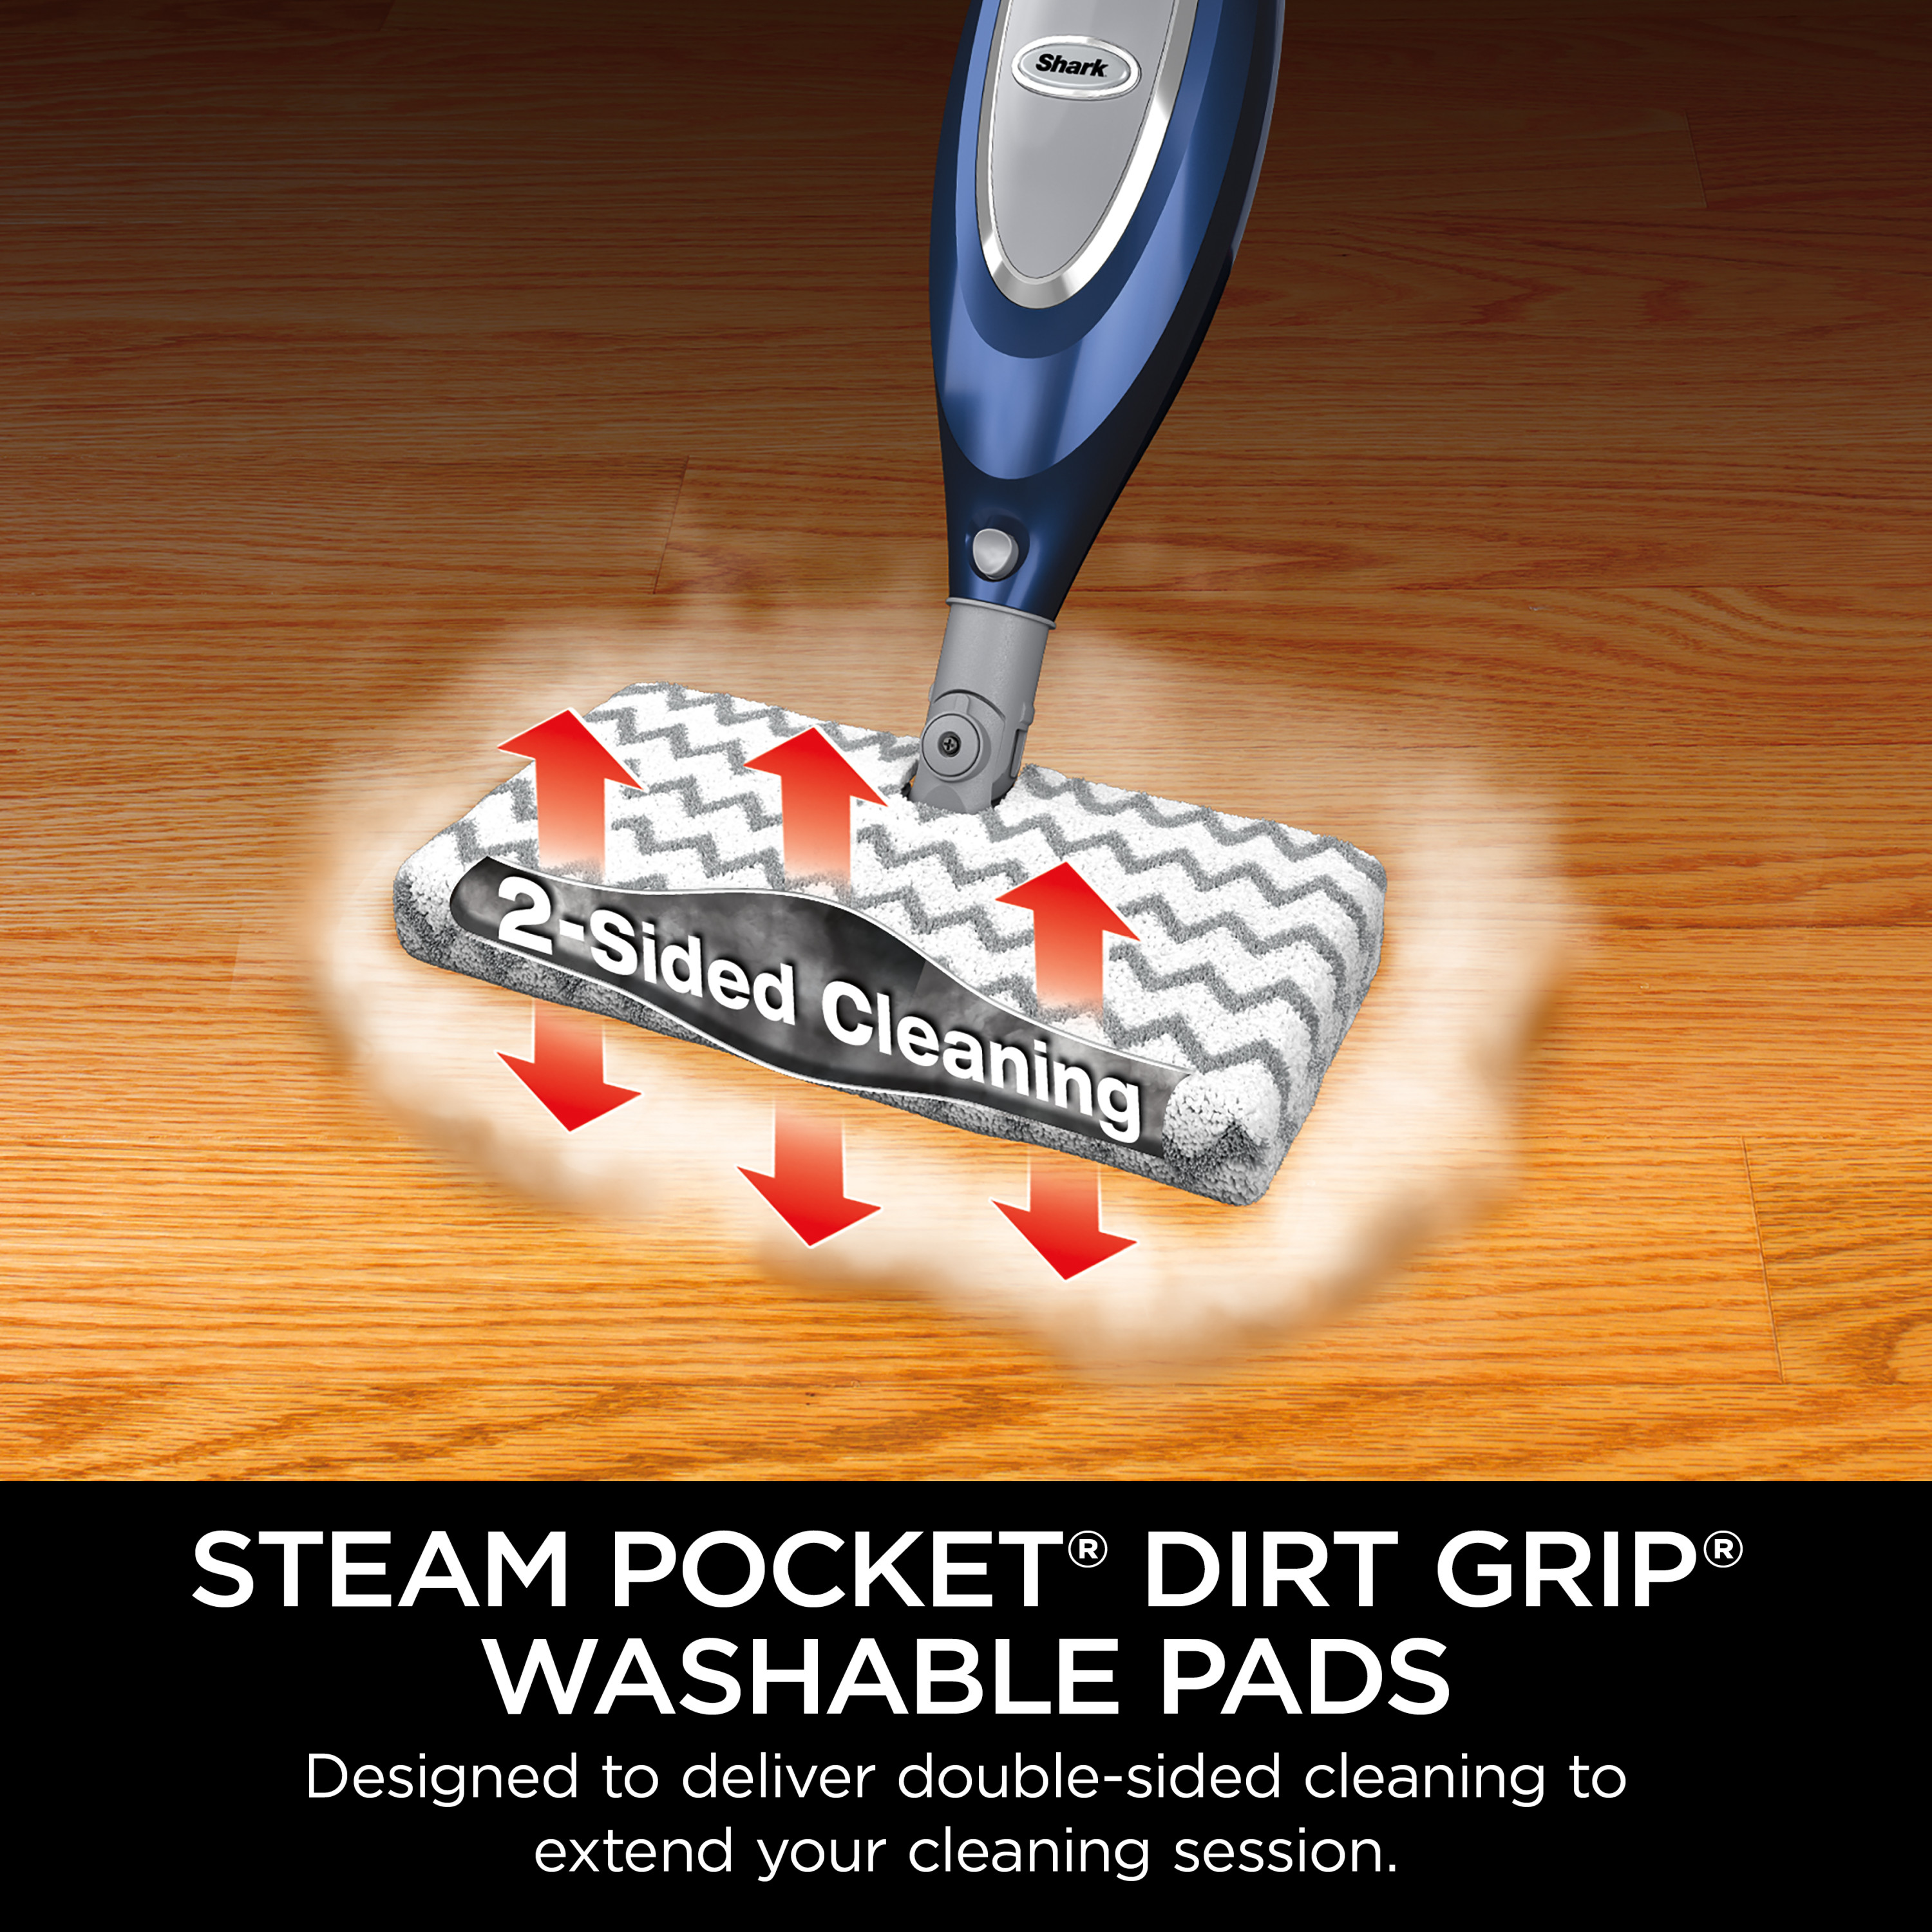 Shark® Professional Steam Pocket® mop for hard floors, deep cleaning, and sanitization, SE460 - image 4 of 10